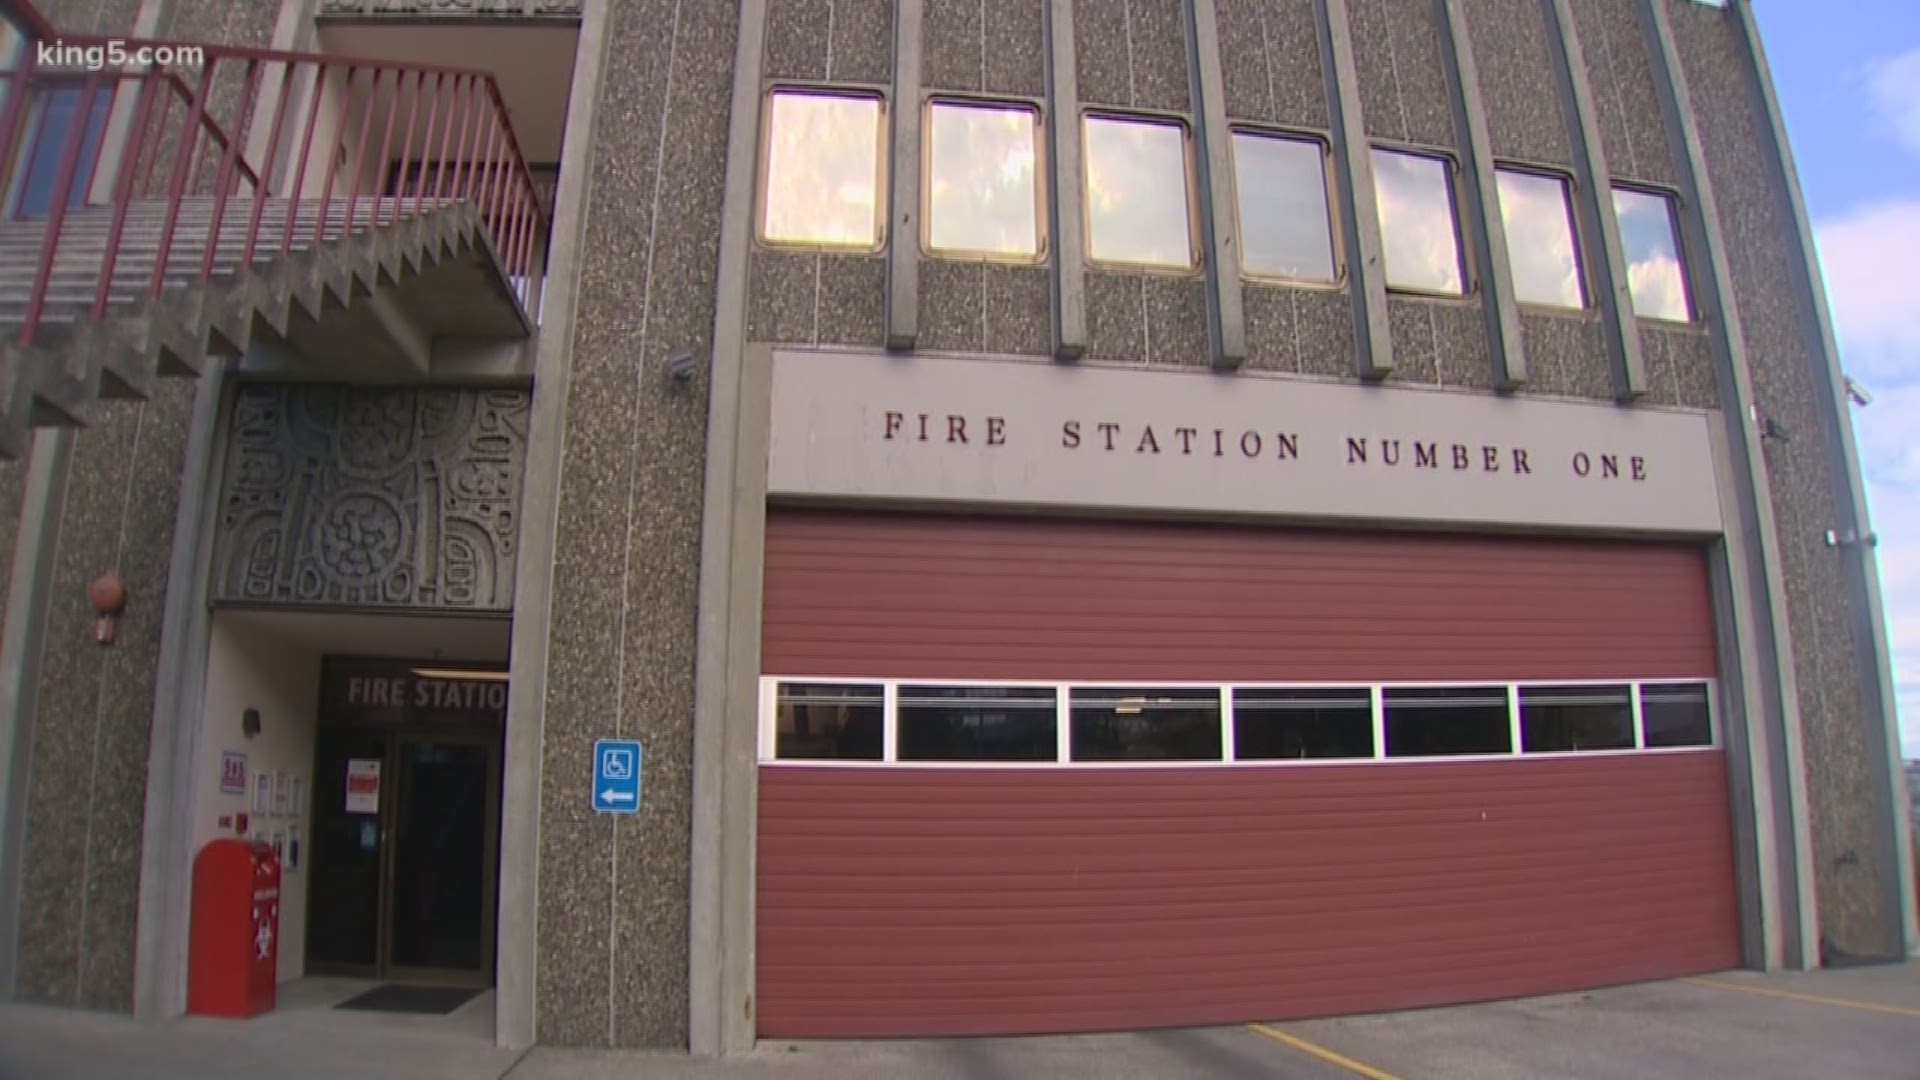 Tacoma Fire’s “Safe Station” program is the first of its kind in Washington state. KING 5's Tony Black reports. 
I'll add the video and publish on Sunday morning